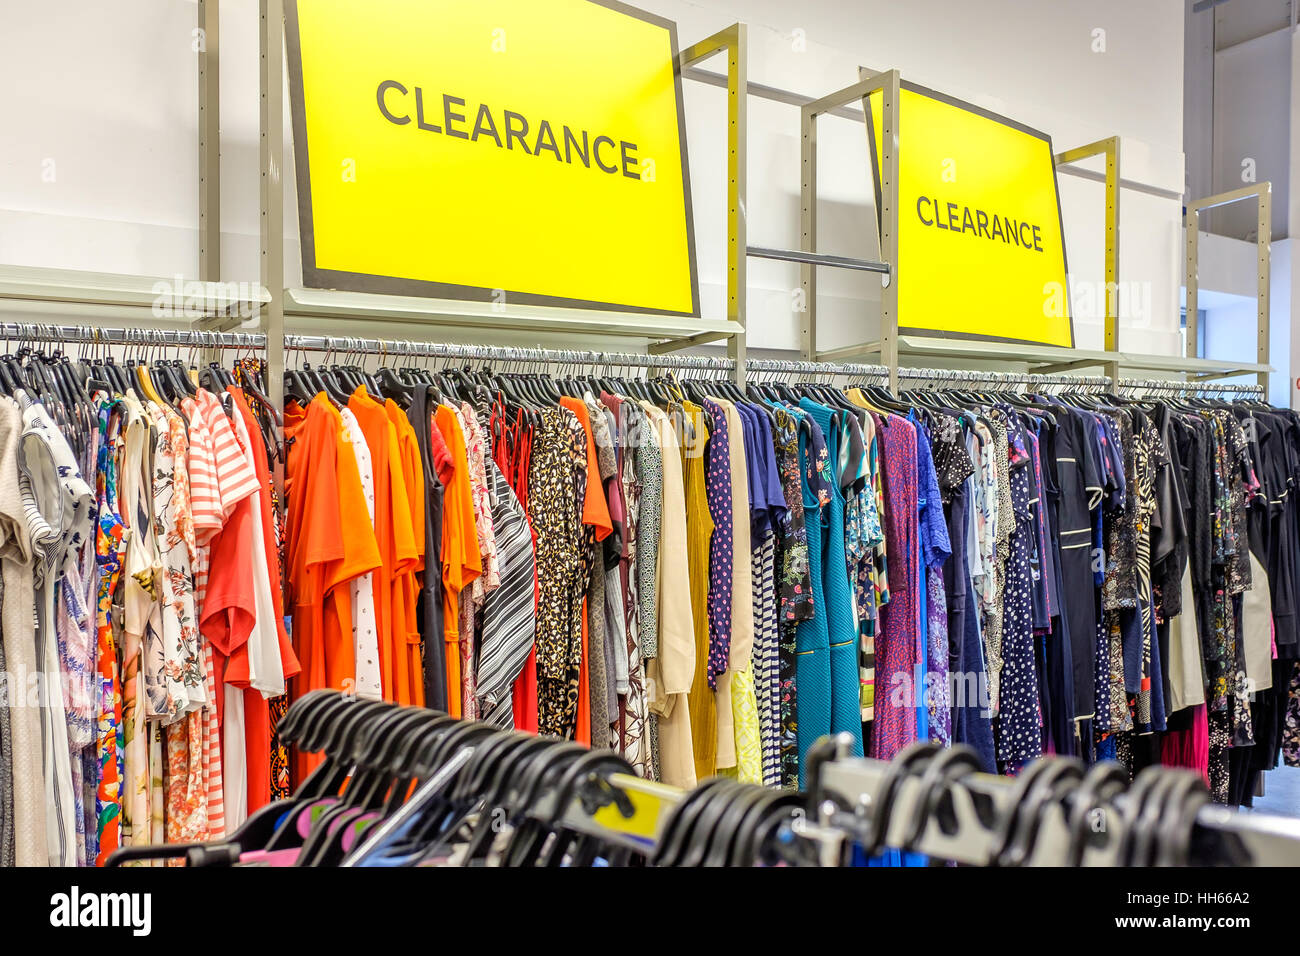 CLOTHING CLEARANCE